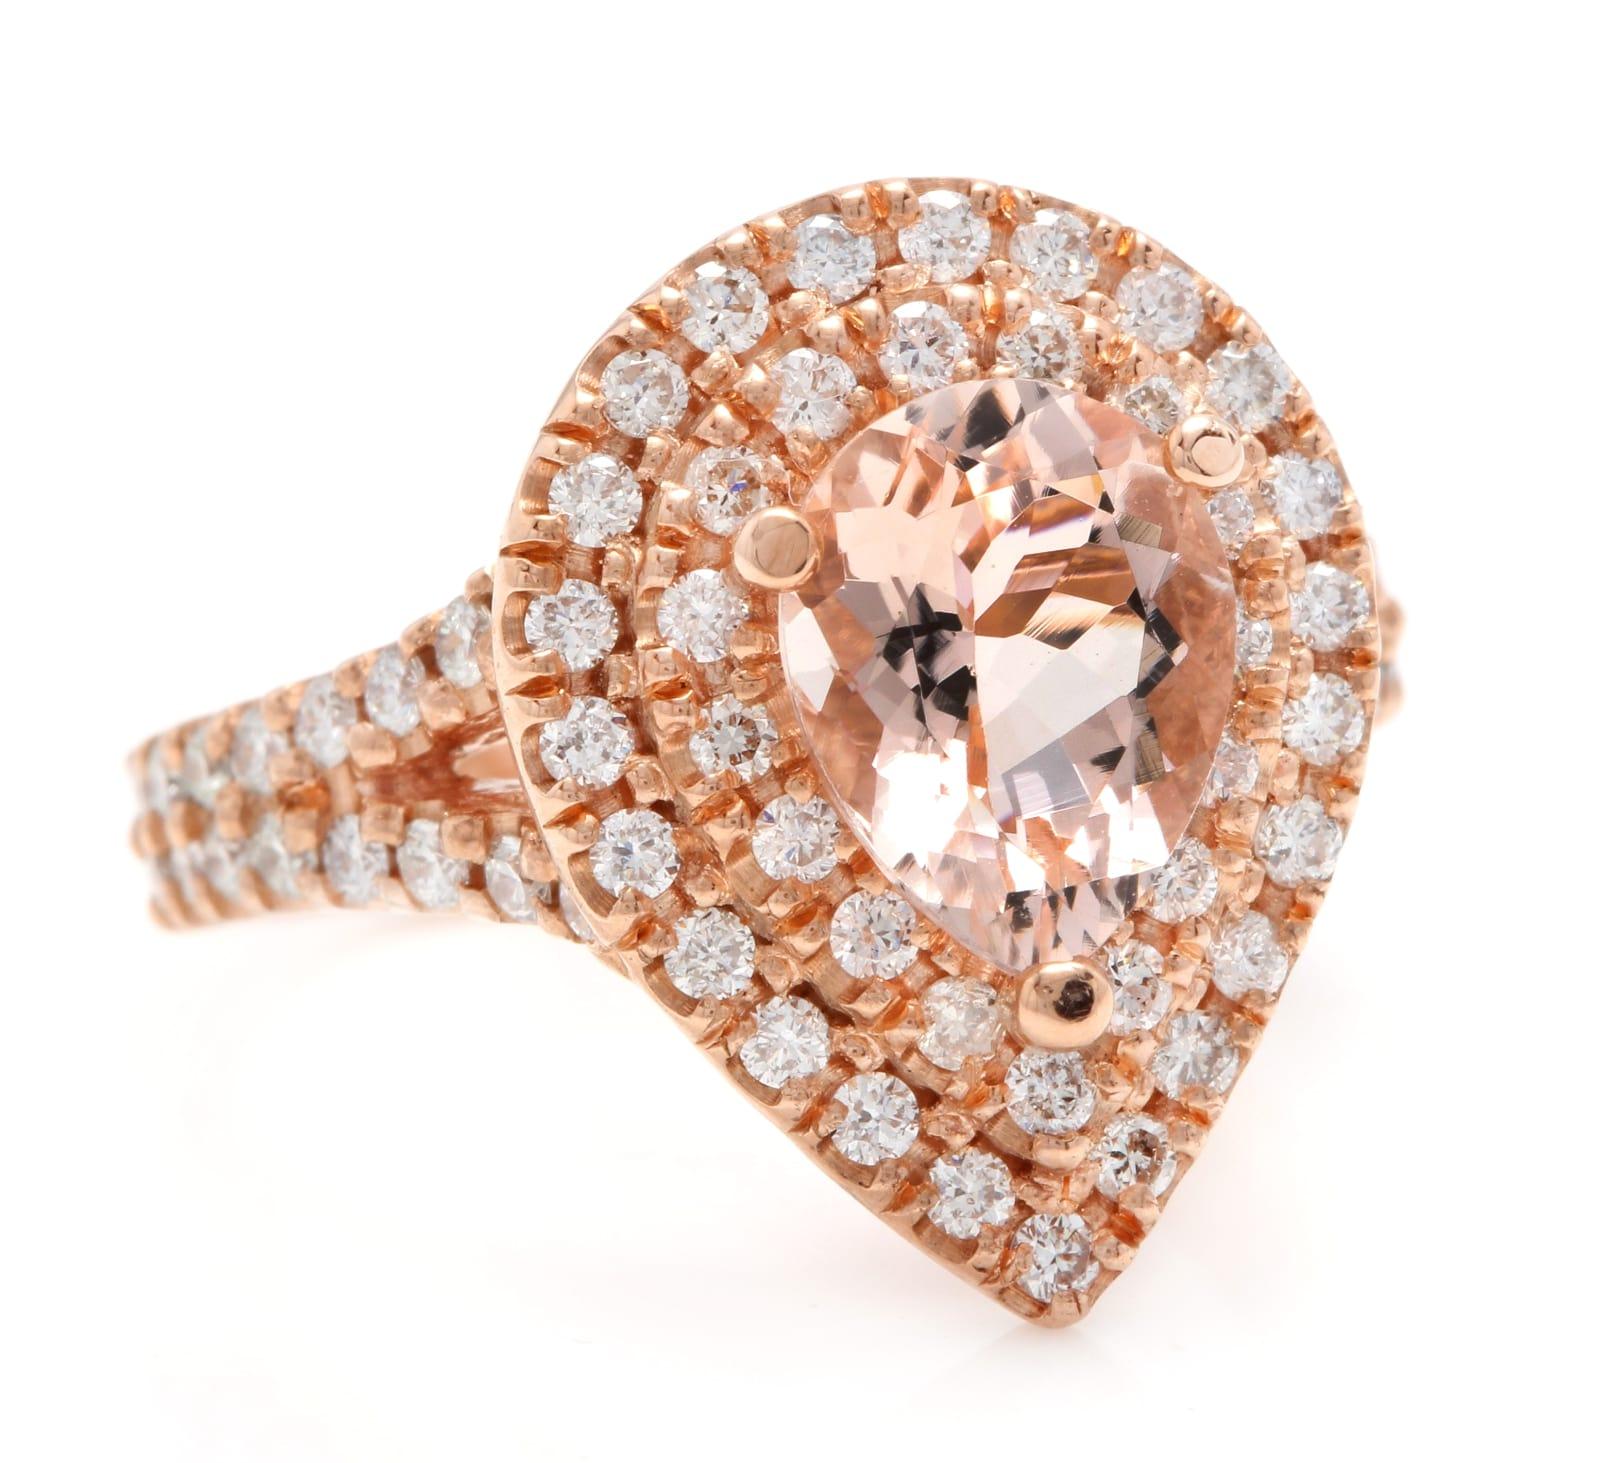 3.40 Carats Exquisite Natural Morganite and Diamond 14K Solid Rose Gold Ring

Suggested Replacement Value: $4,800.00

Total Natural Pear Shaped Morganite Weights: Approx. 2.00 Carats

Morganite Measures: Approx. 10.00 x 7.00mm

Morganite Treatment: